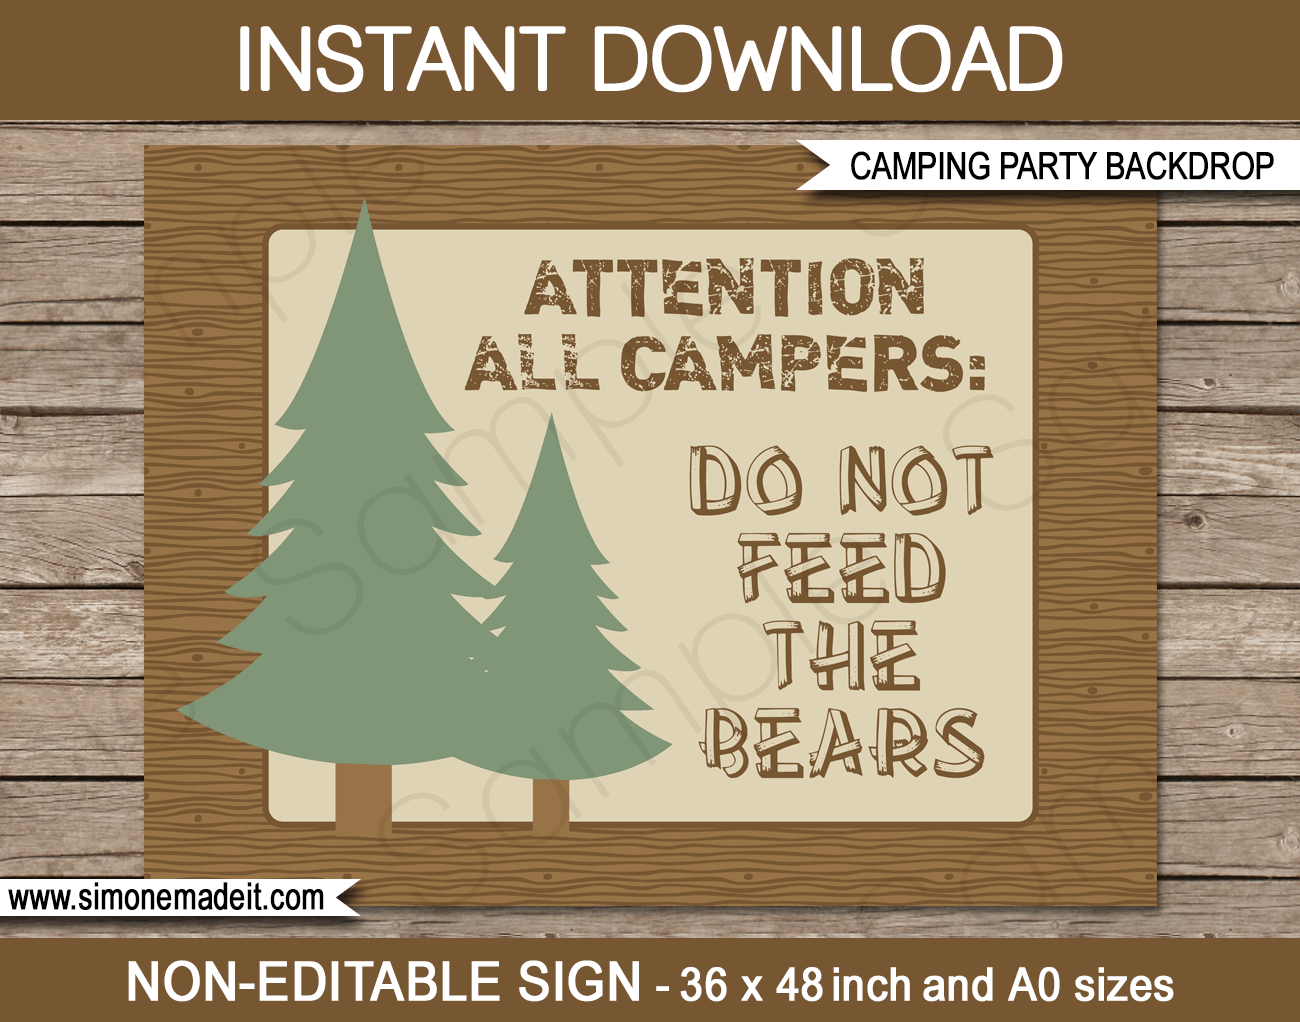 Printable Camping Party Sign Backdrop - Do not Feed the Bears | DIY Template | Party Decorations | 36x48 inches | A0 | $4.50 Instant Download via SIMONEmadeit.com